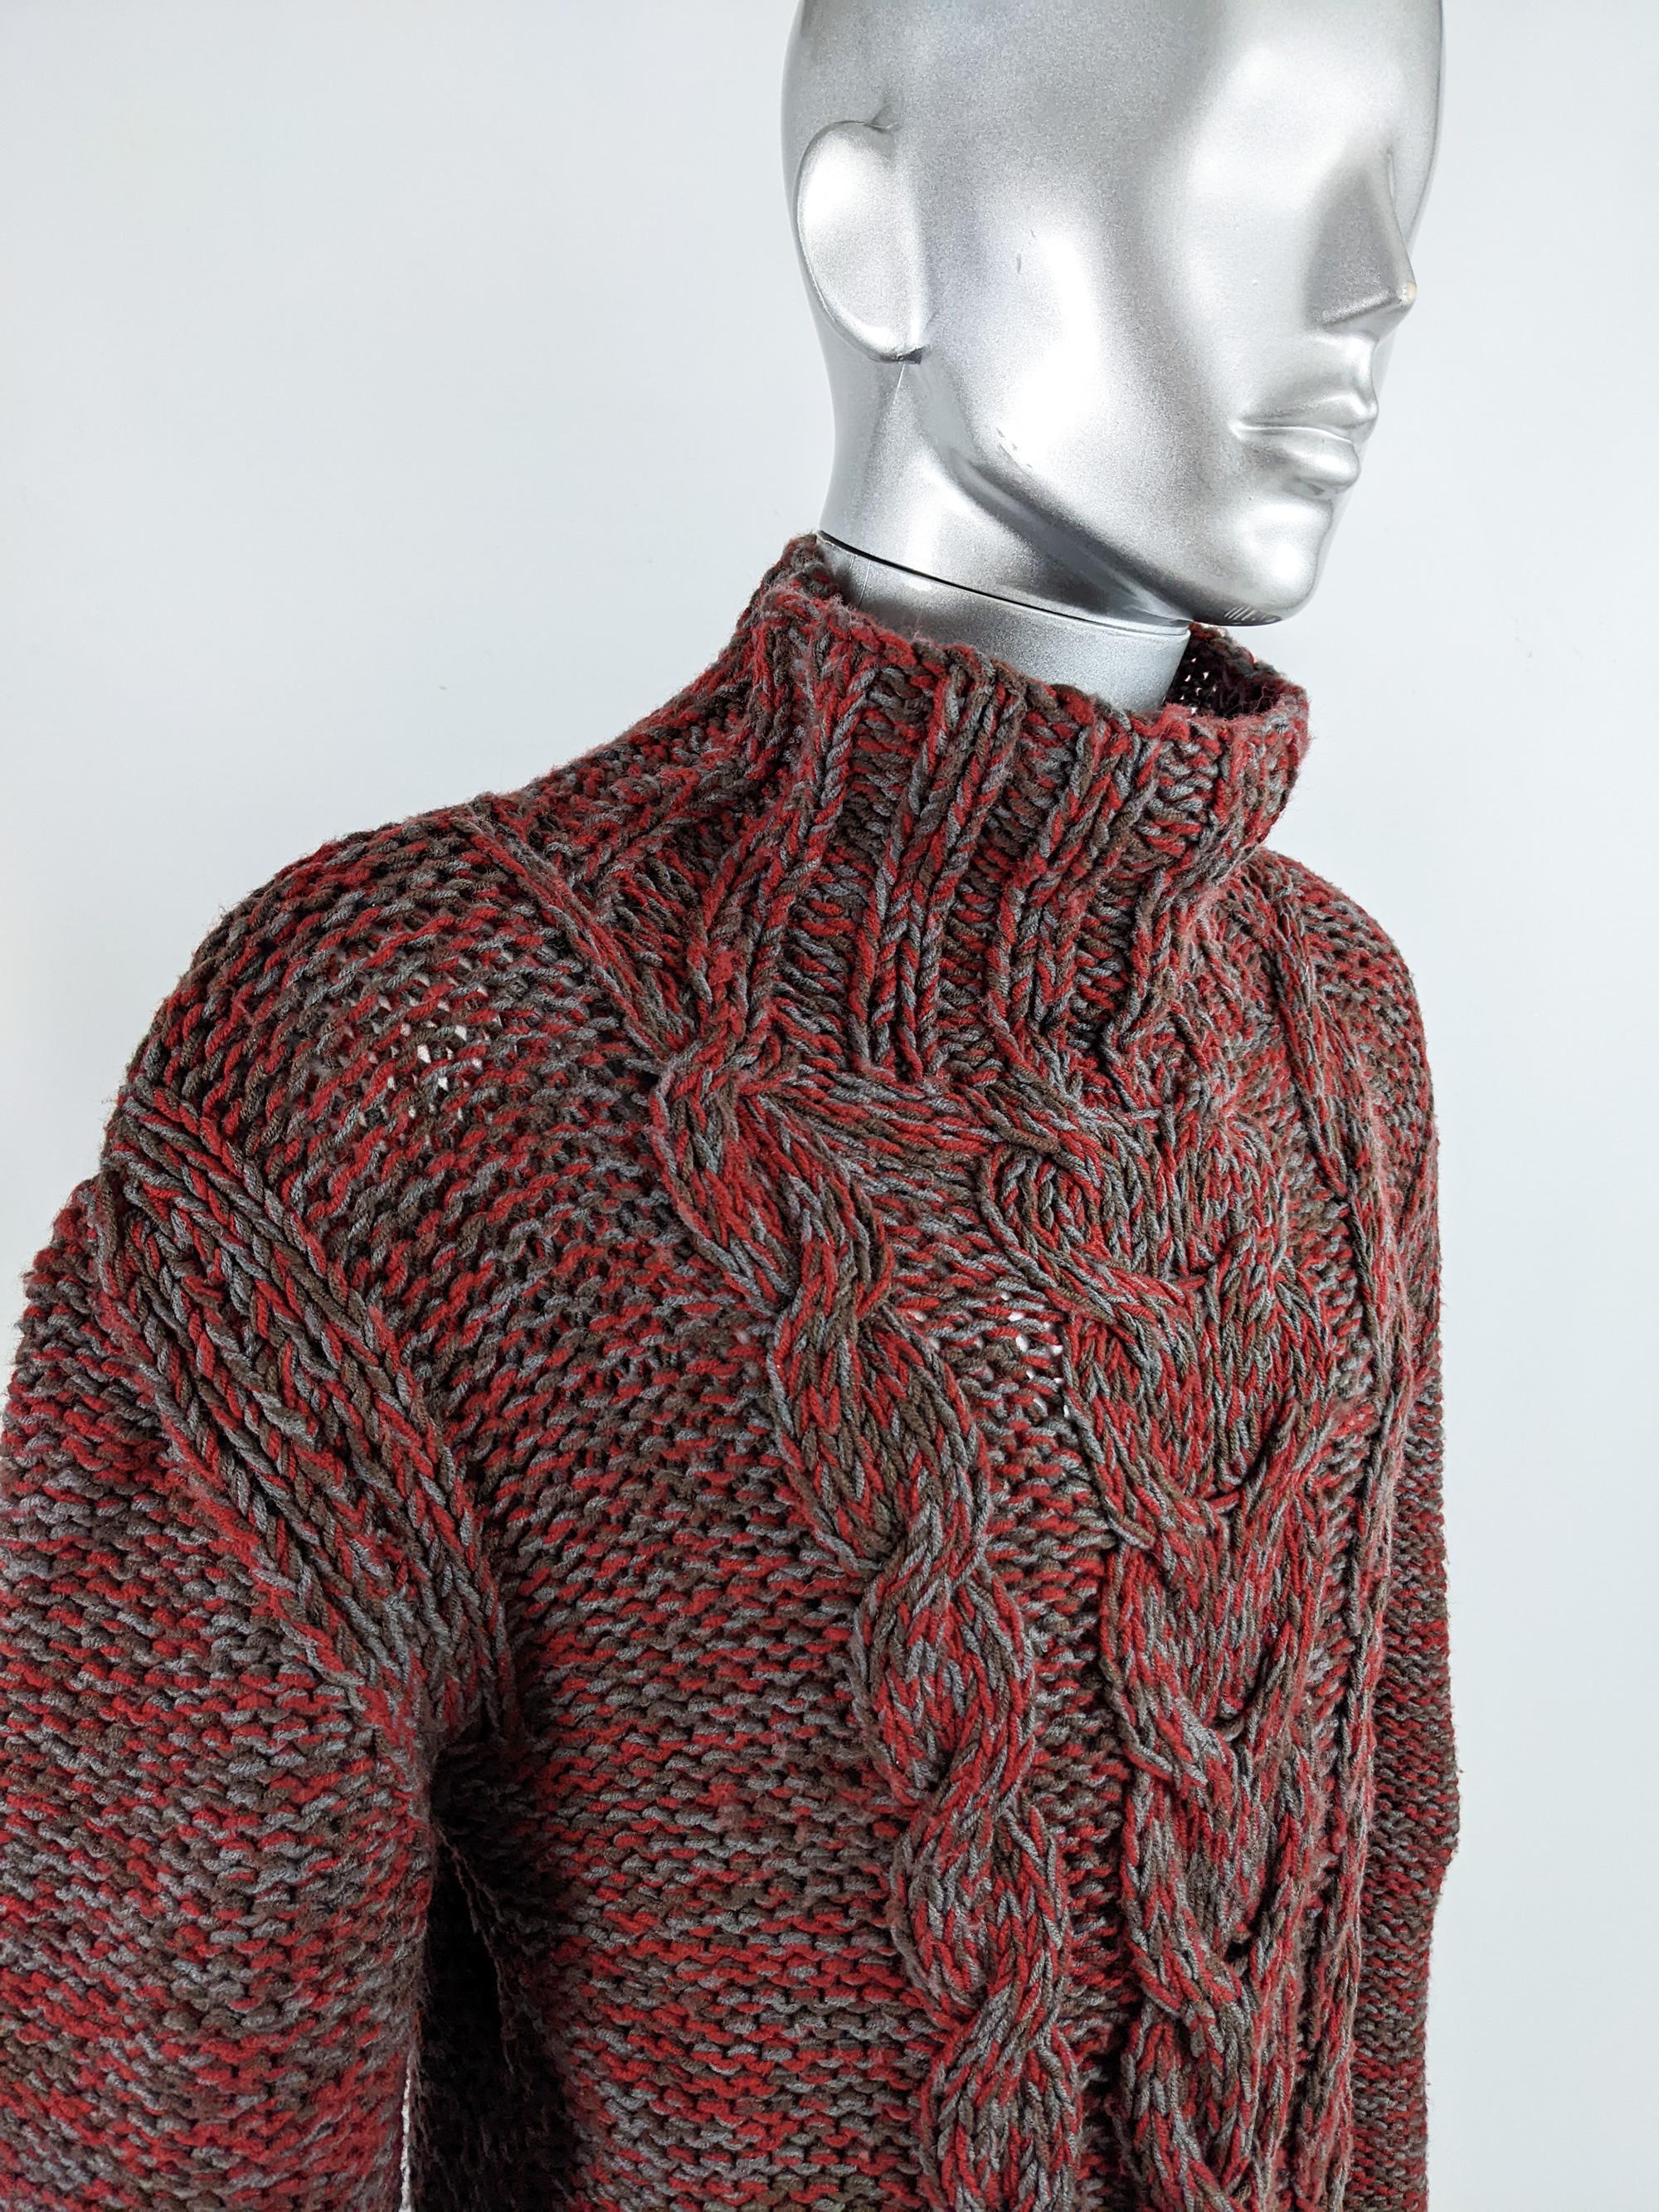 Men's Joseph Vintage Mens 1990s Red Cable Knit Knitwear Sweater 